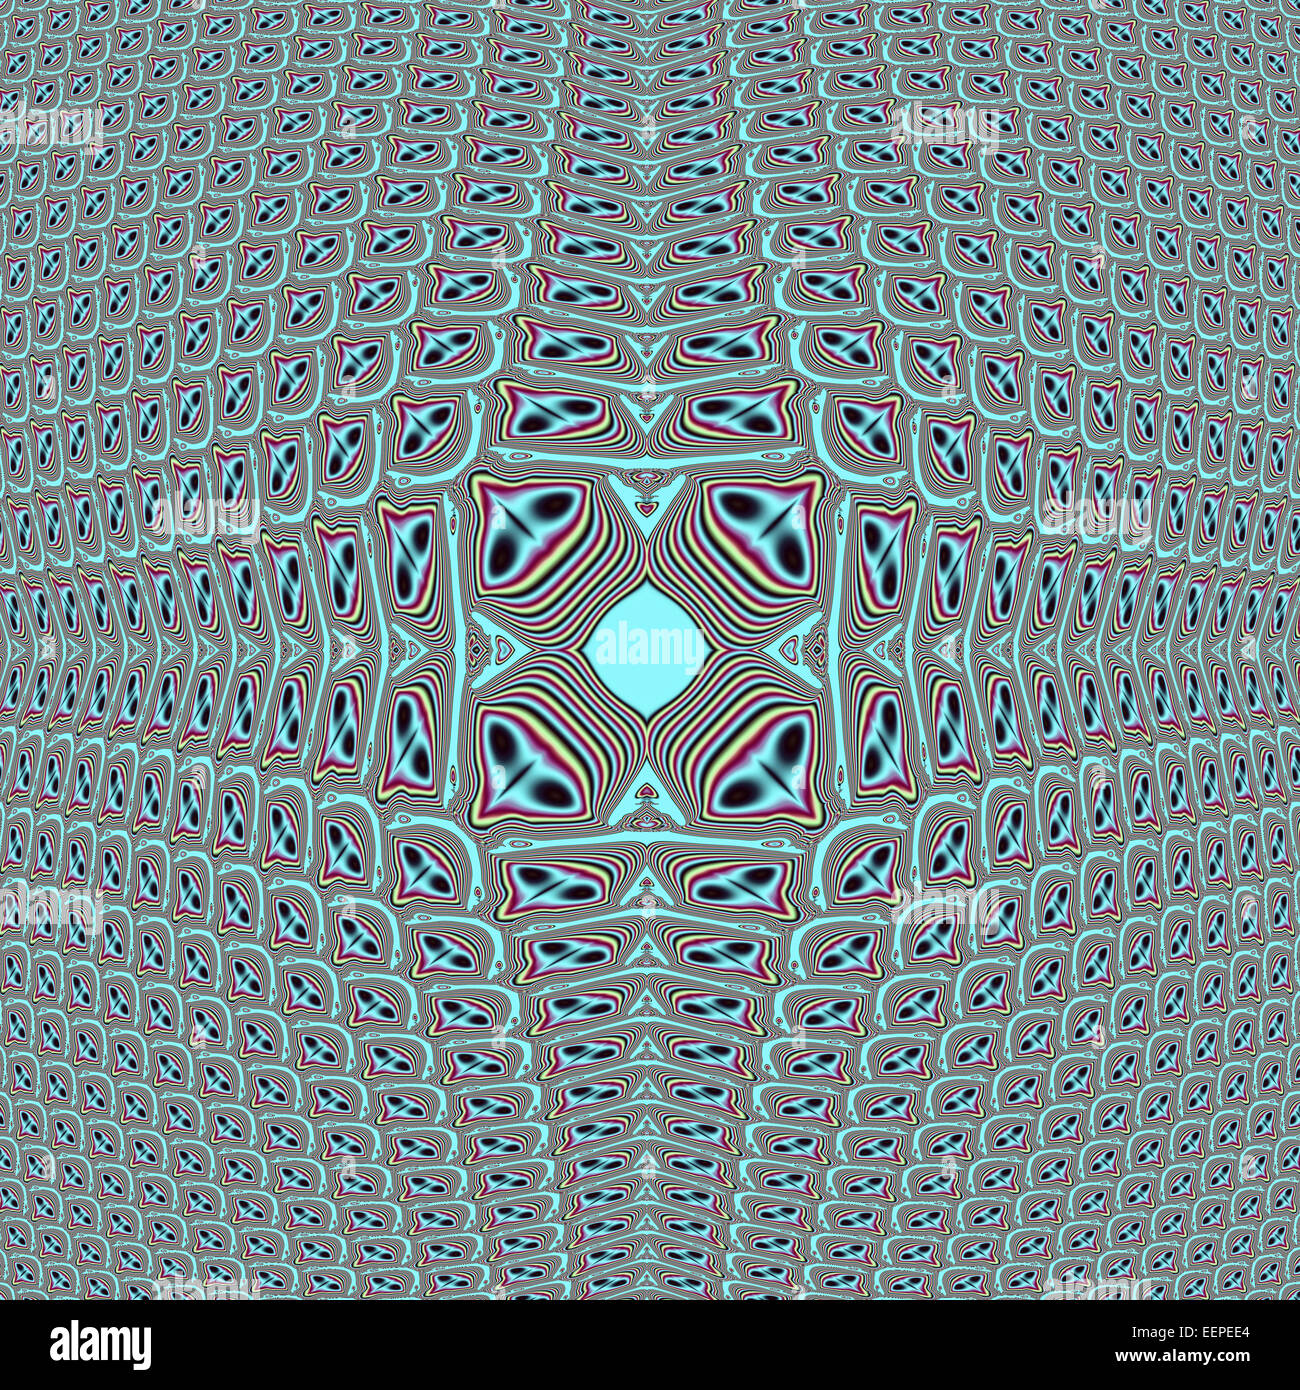 Digitally generated abstract pattern Stock Photo